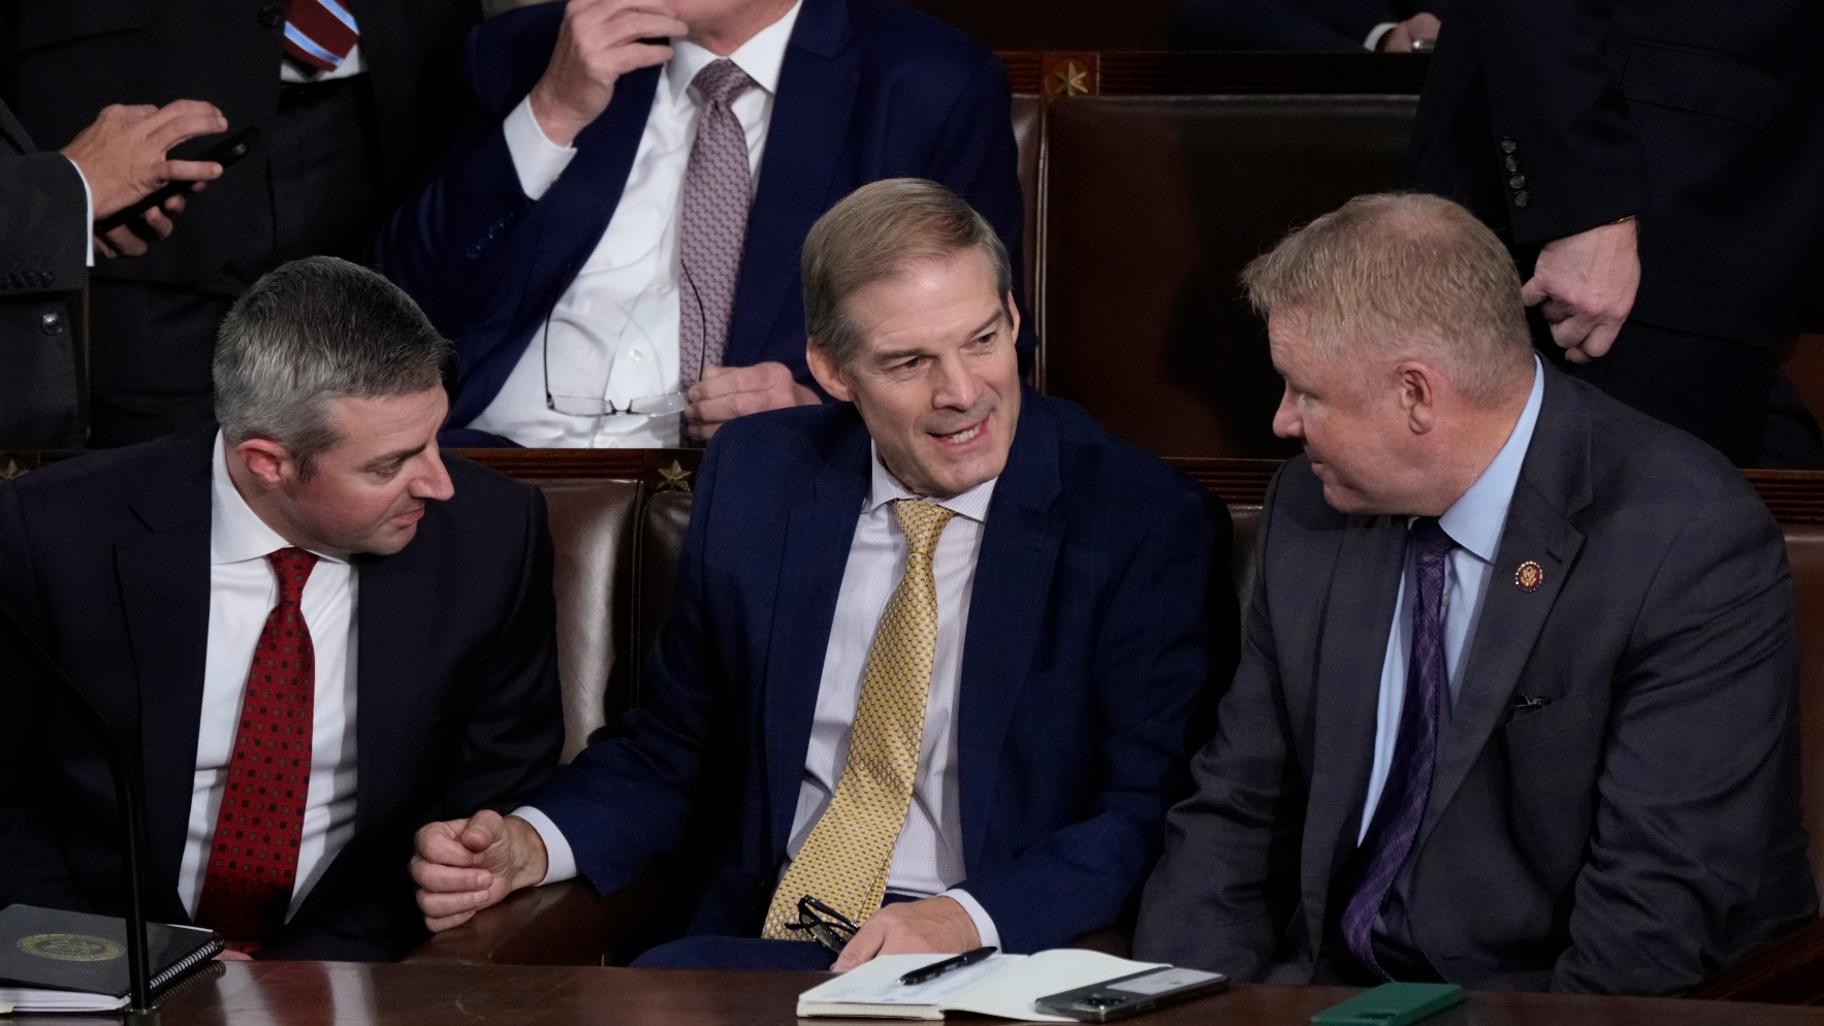 Rep. Jim Jordan, R-Ohio, chairman of the House Judiciary Committee, seated center, talks to Rep. Warren Davidson, R-Ohio, right, and a House staff member, left, as Republicans try to elect Jordan, a top Donald Trump ally, to be the new House speaker, at the Capitol in Washington, Tuesday, Oct. 17, 2023. (J. Scott Applewhite / AP Photo)